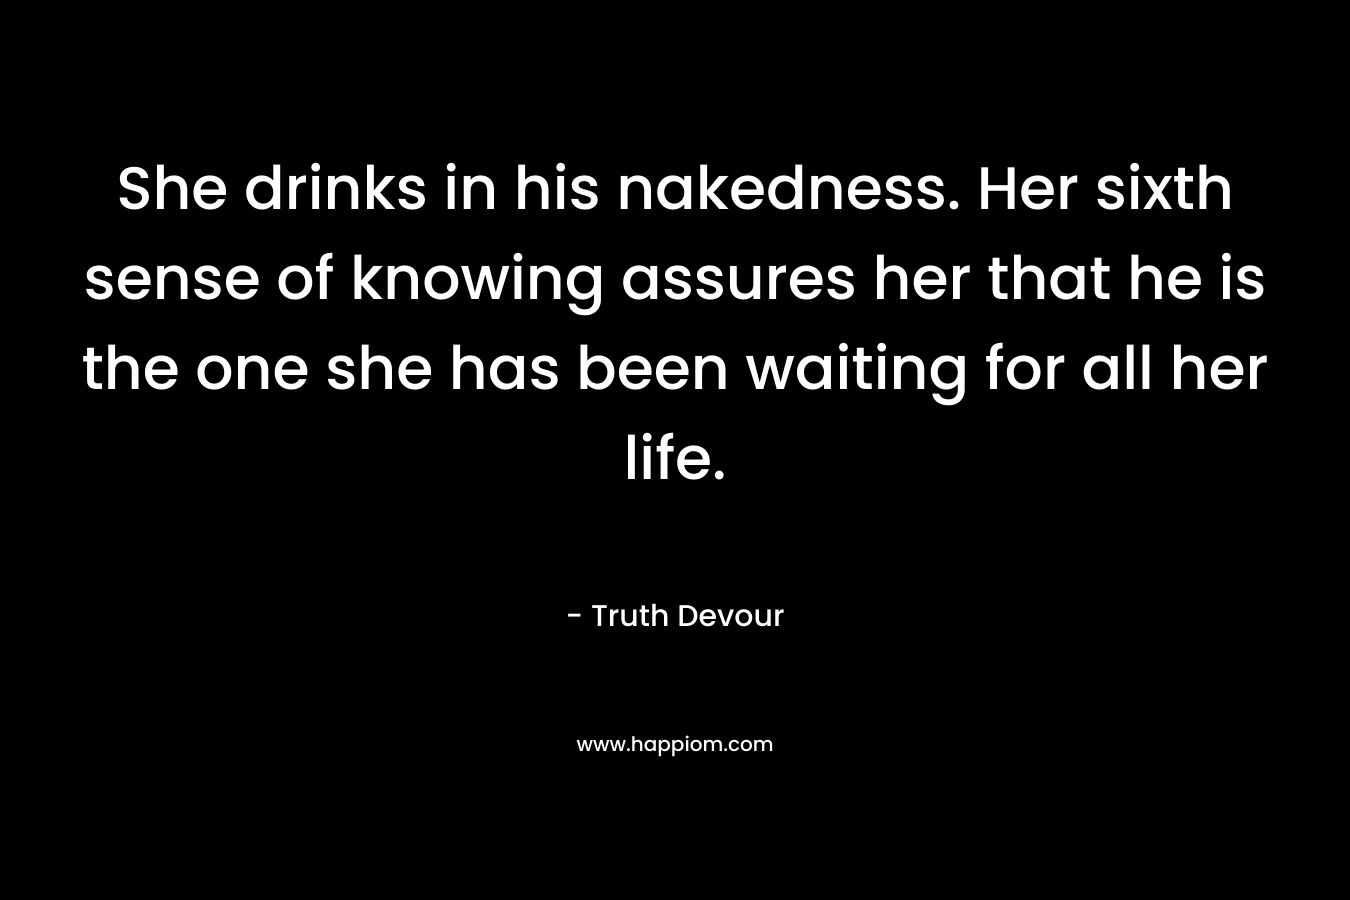 She drinks in his nakedness. Her sixth sense of knowing assures her that he is the one she has been waiting for all her life.